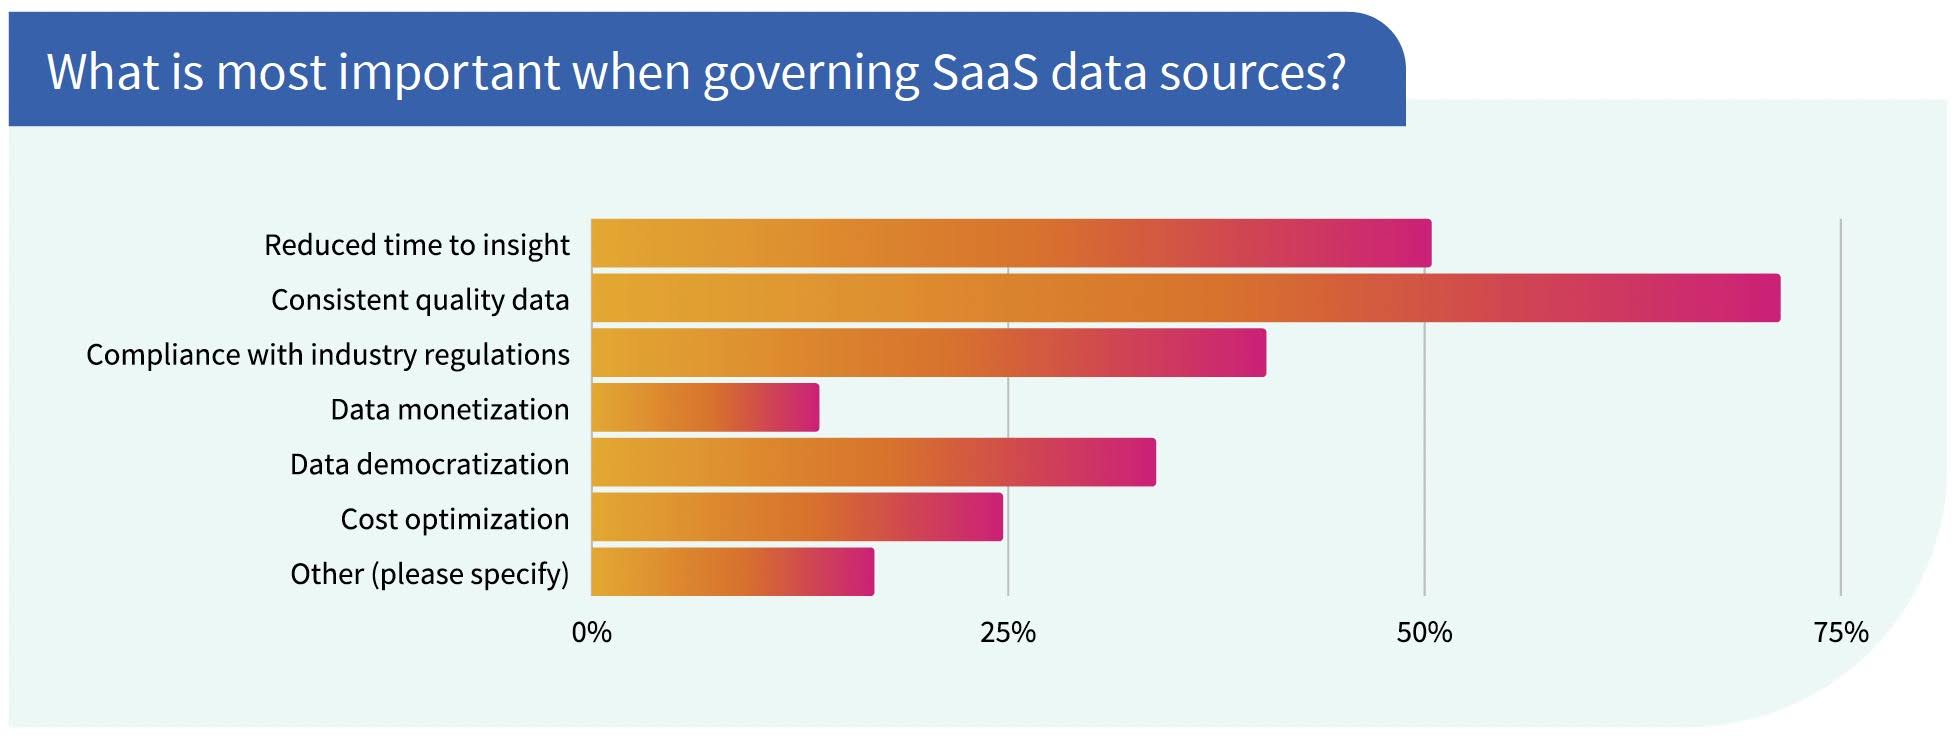 What is most important when governing SaaS data sources?